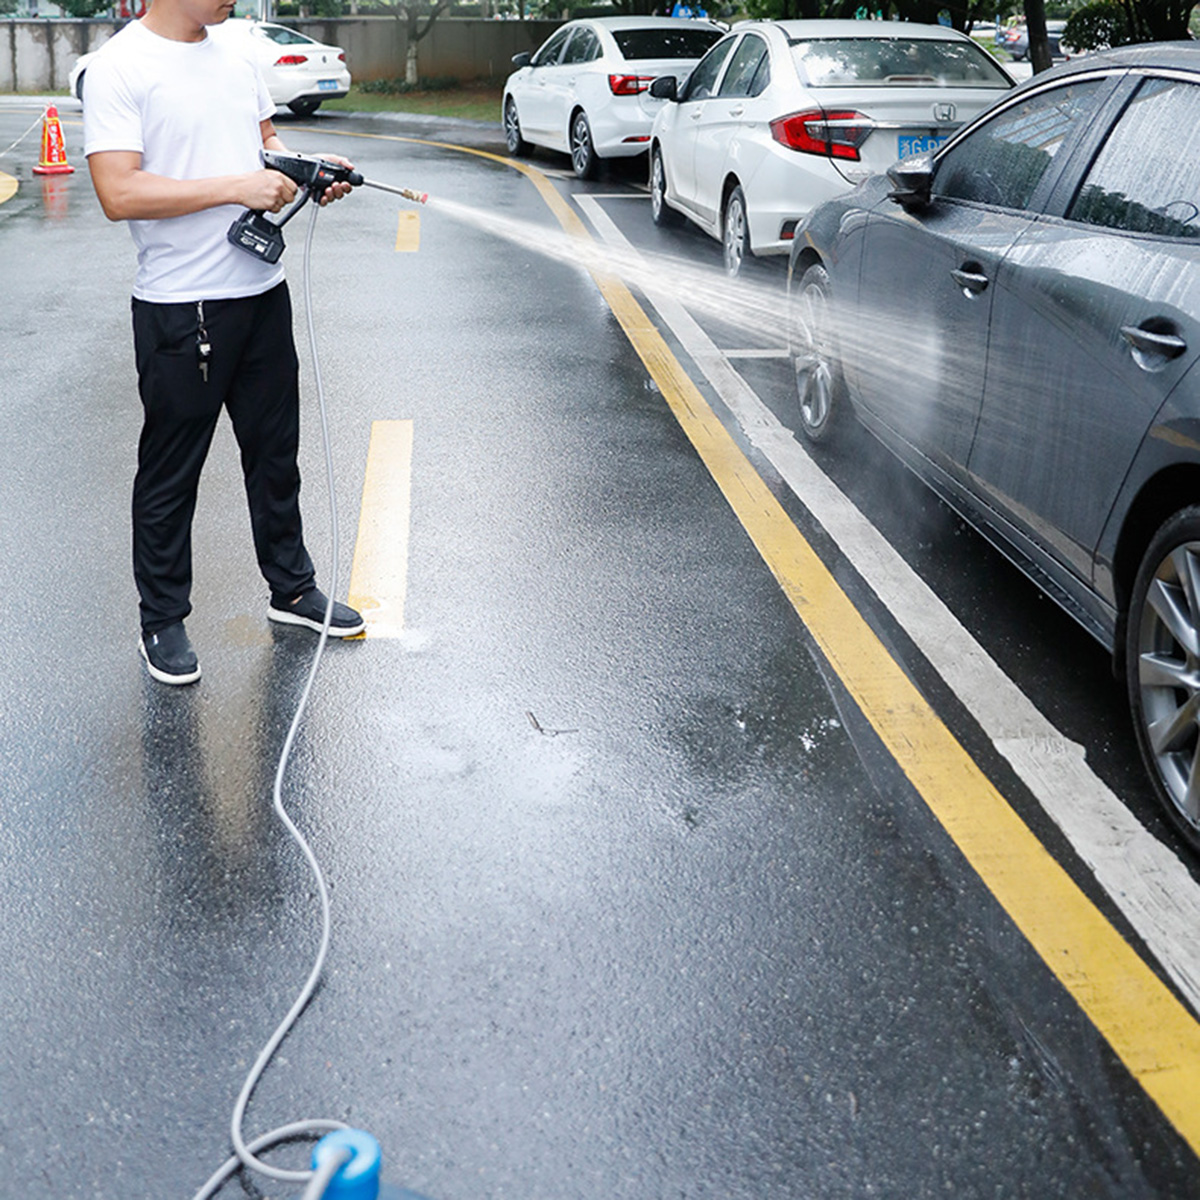 12V-15000mAh-Cordless-Electric-Pressure-Washer-Rechargeable-Car-Washing-Machine-Water-Spray-Guns-W-1-1830643-9